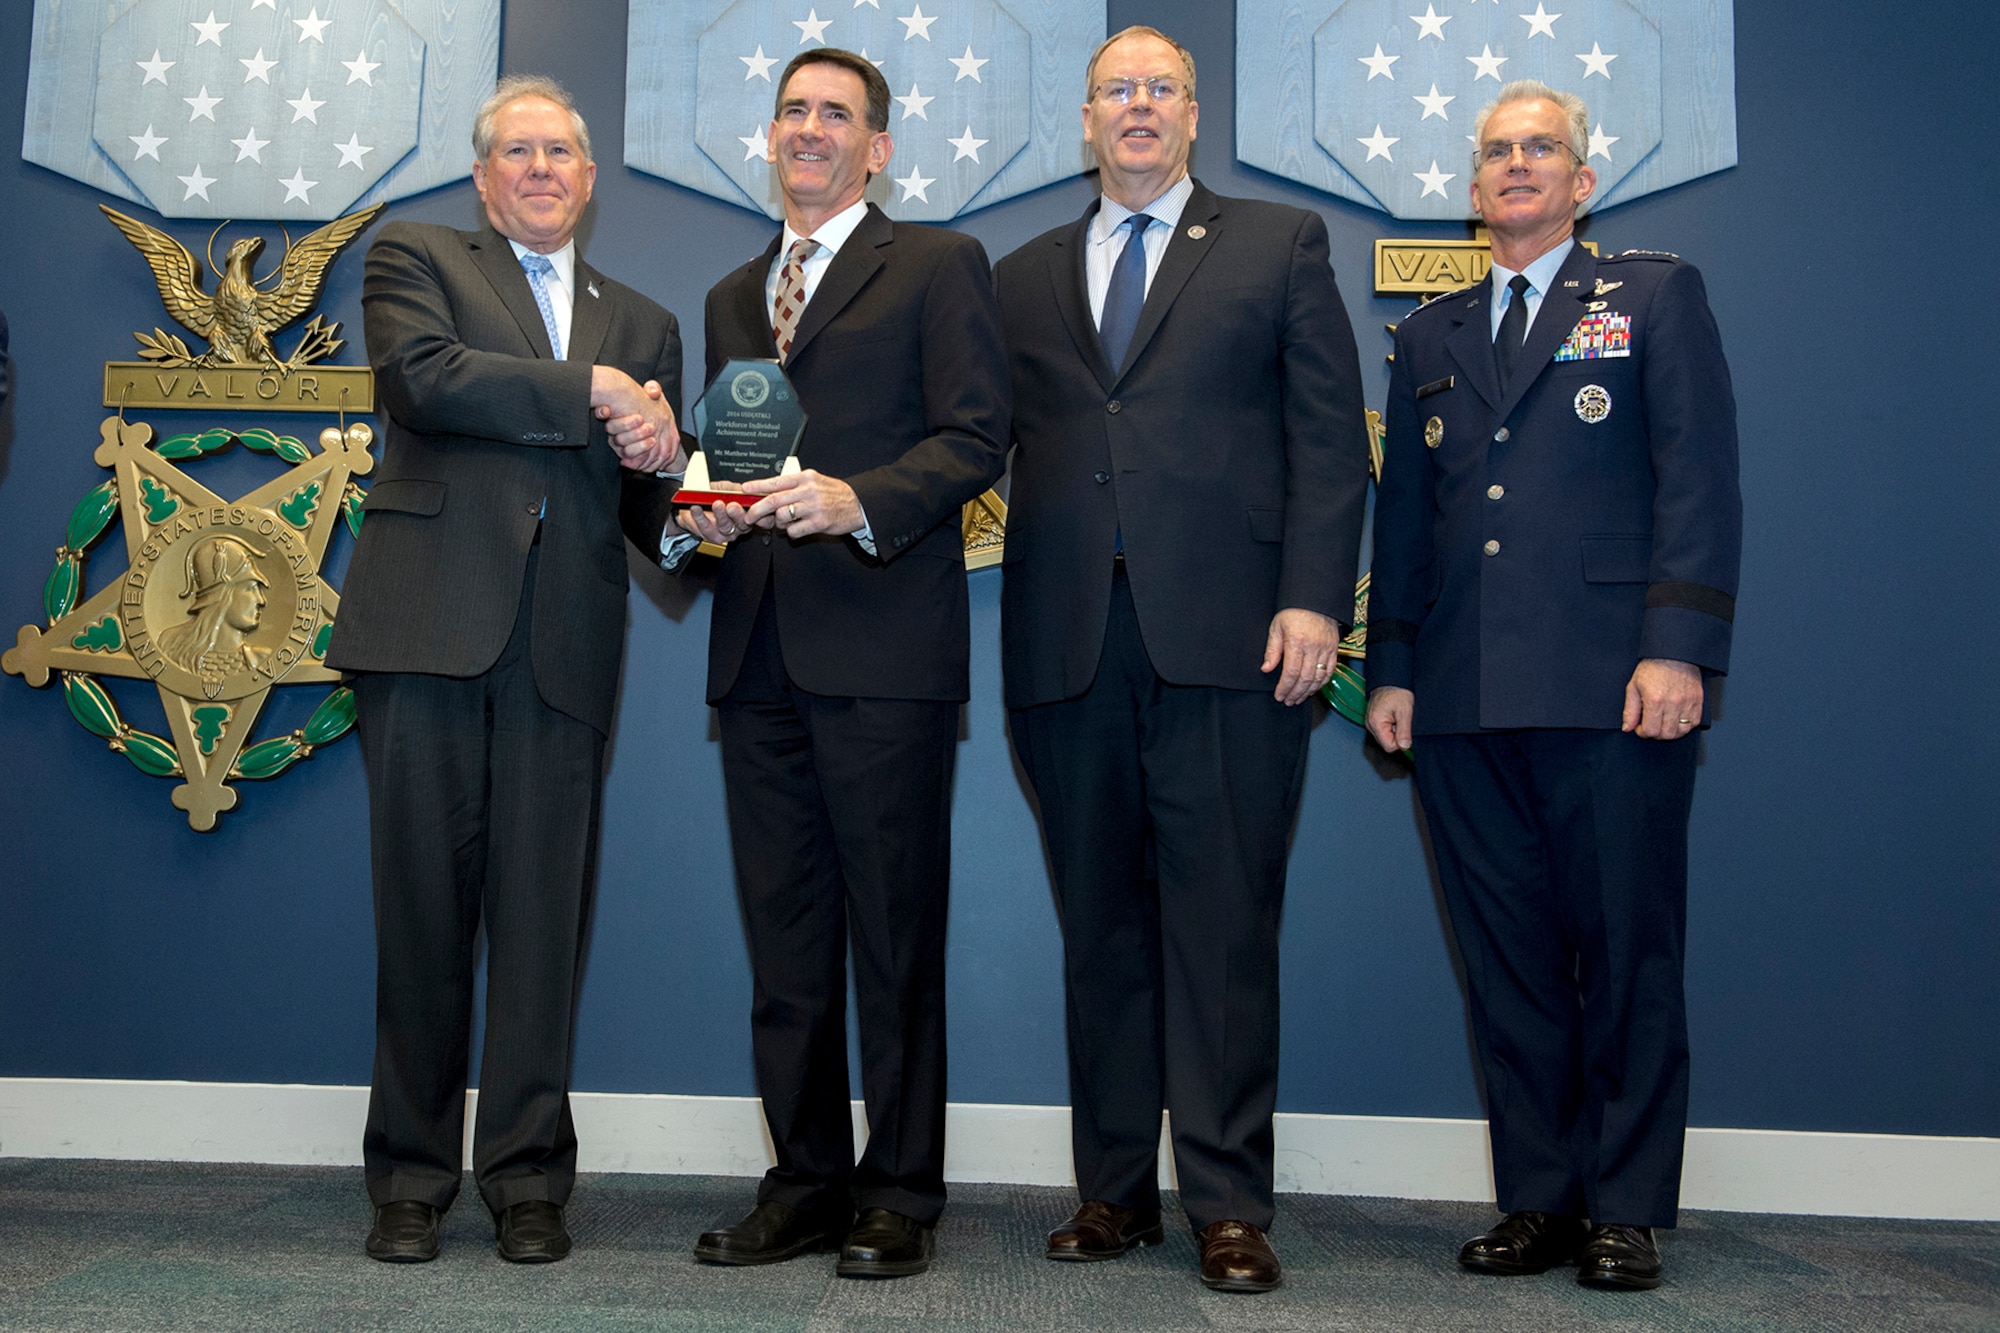 Frank Kendall, Under Secretary of Defense for Acquisition, left, presents Matthew Meininger with A Defense Acquisition Workforce Individual Award for science and technology management during a ceremony at the Pentagon on Dec. 8, 2016. Standing with them are Vice Chairman of the Joint Chiefs of Staff Gen. Paul J. Selva right, and Deputy Secretary of Defense Bob Work. (DoD photo) 